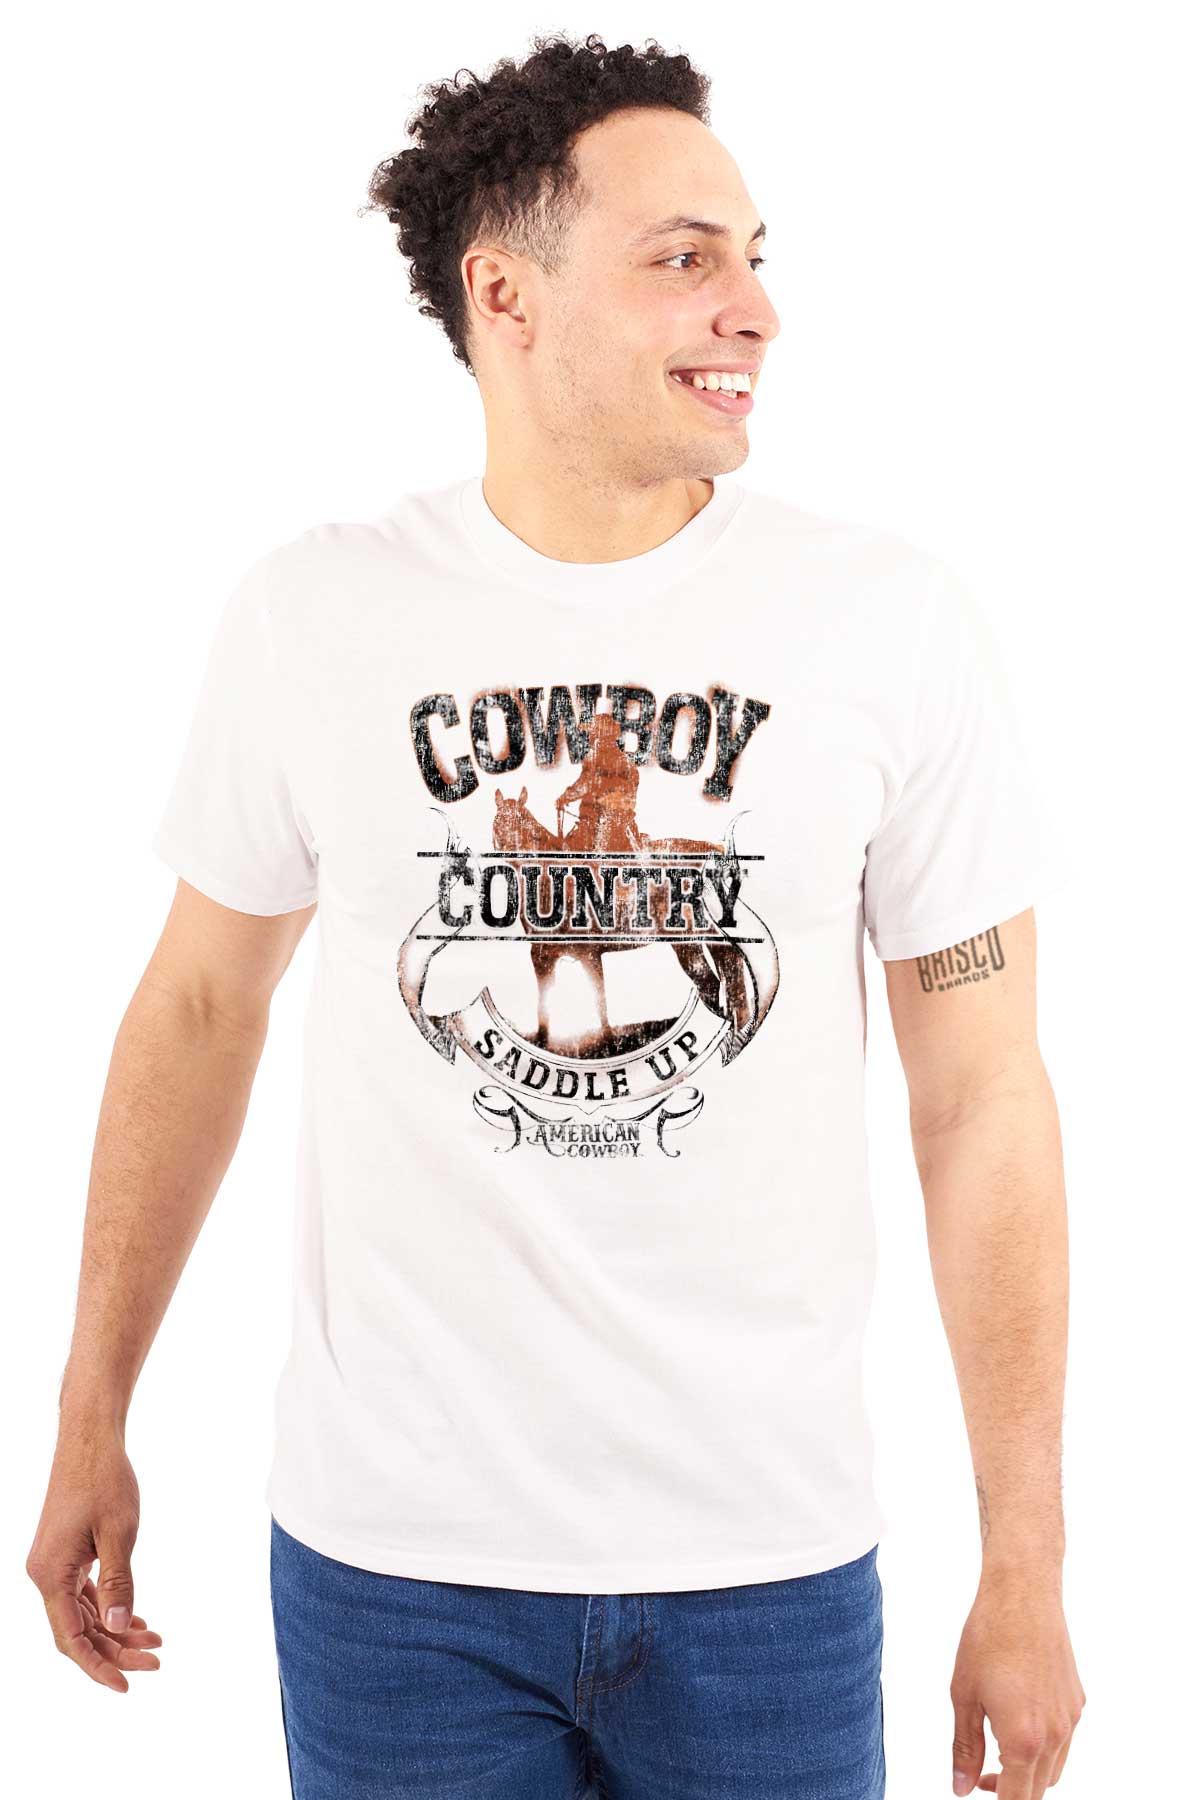 Saddle Up Country Western Cowboy Men's Graphic T Shirt Tees Brisco Brands S - image 1 of 5